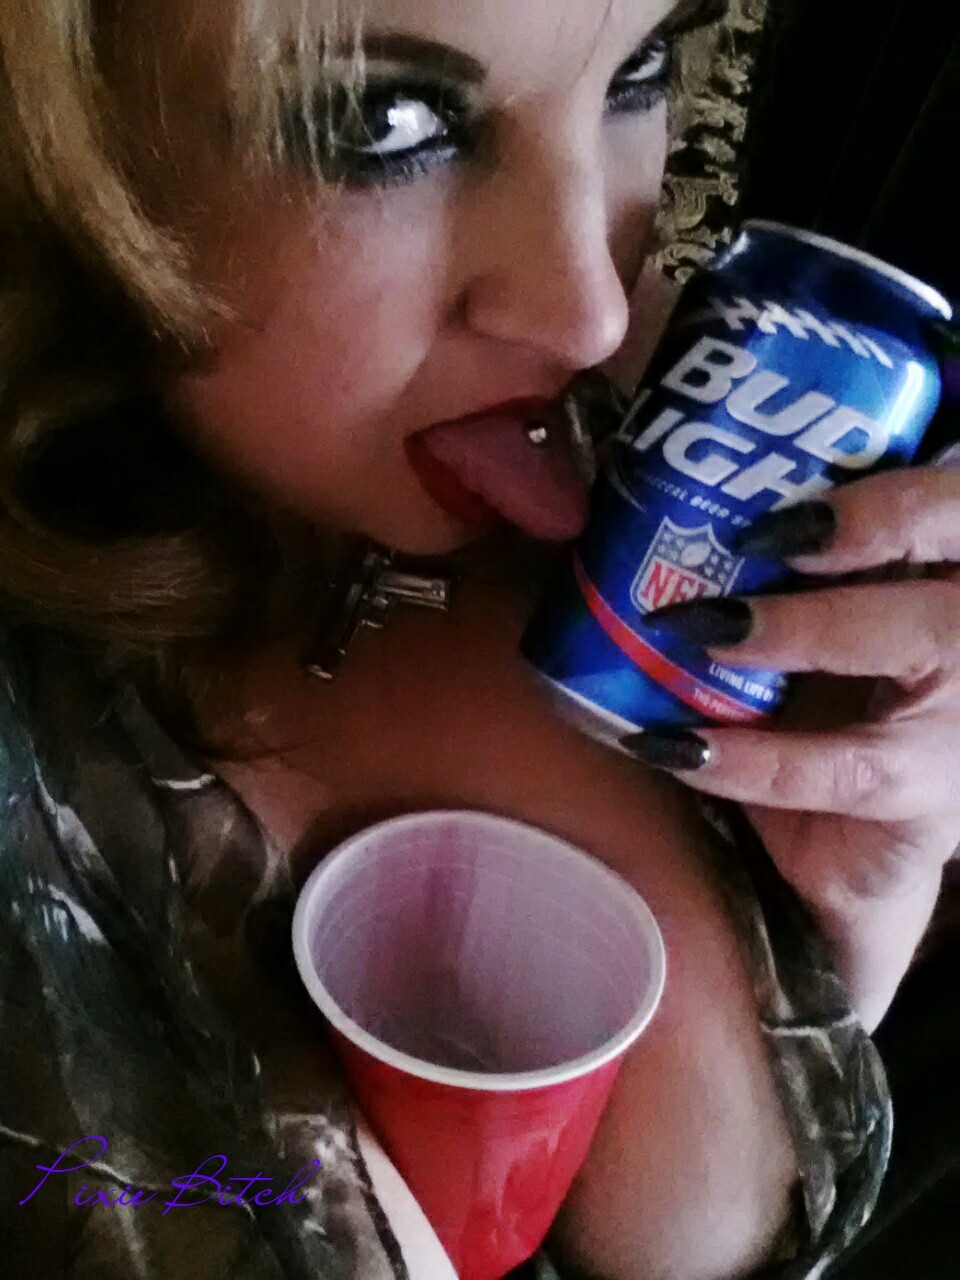 pixie-bitch75:  Thirsty Thursday… My Red Solo Cup needs filling up, who wants to